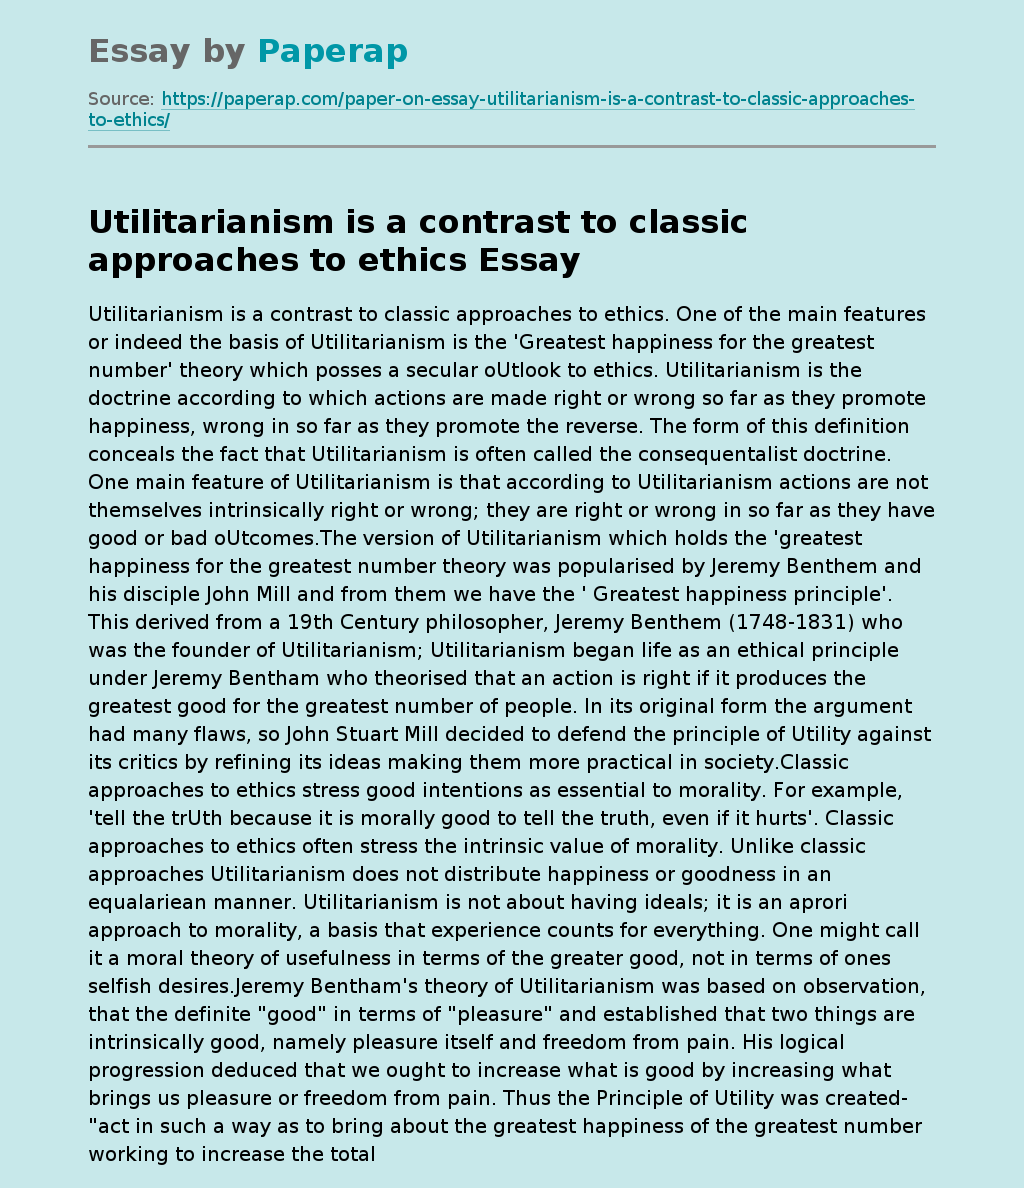 Utilitarianism is a contrast to classic approaches to ethics